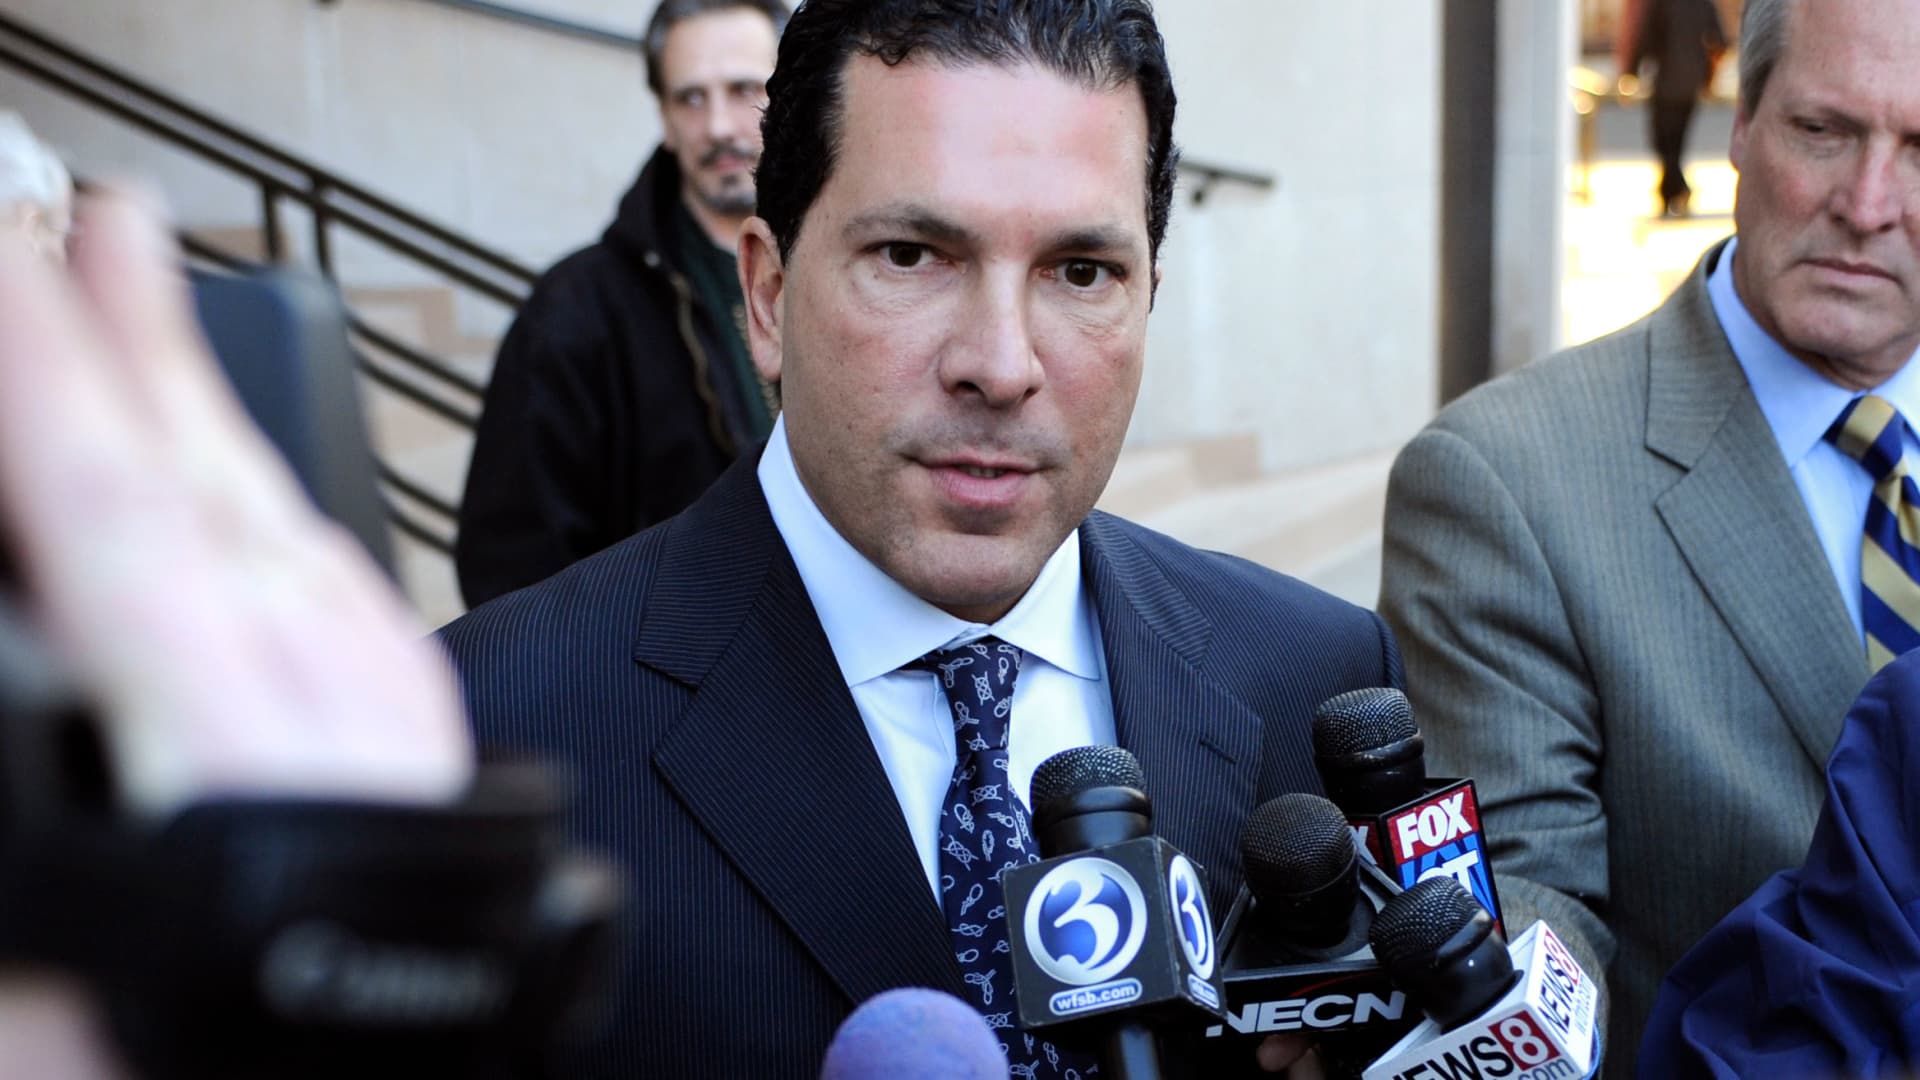 In this March 17, 2011 file photo, attorney Joseph Tacopina speaks to the media outside Superior Court in New Haven, Conn.